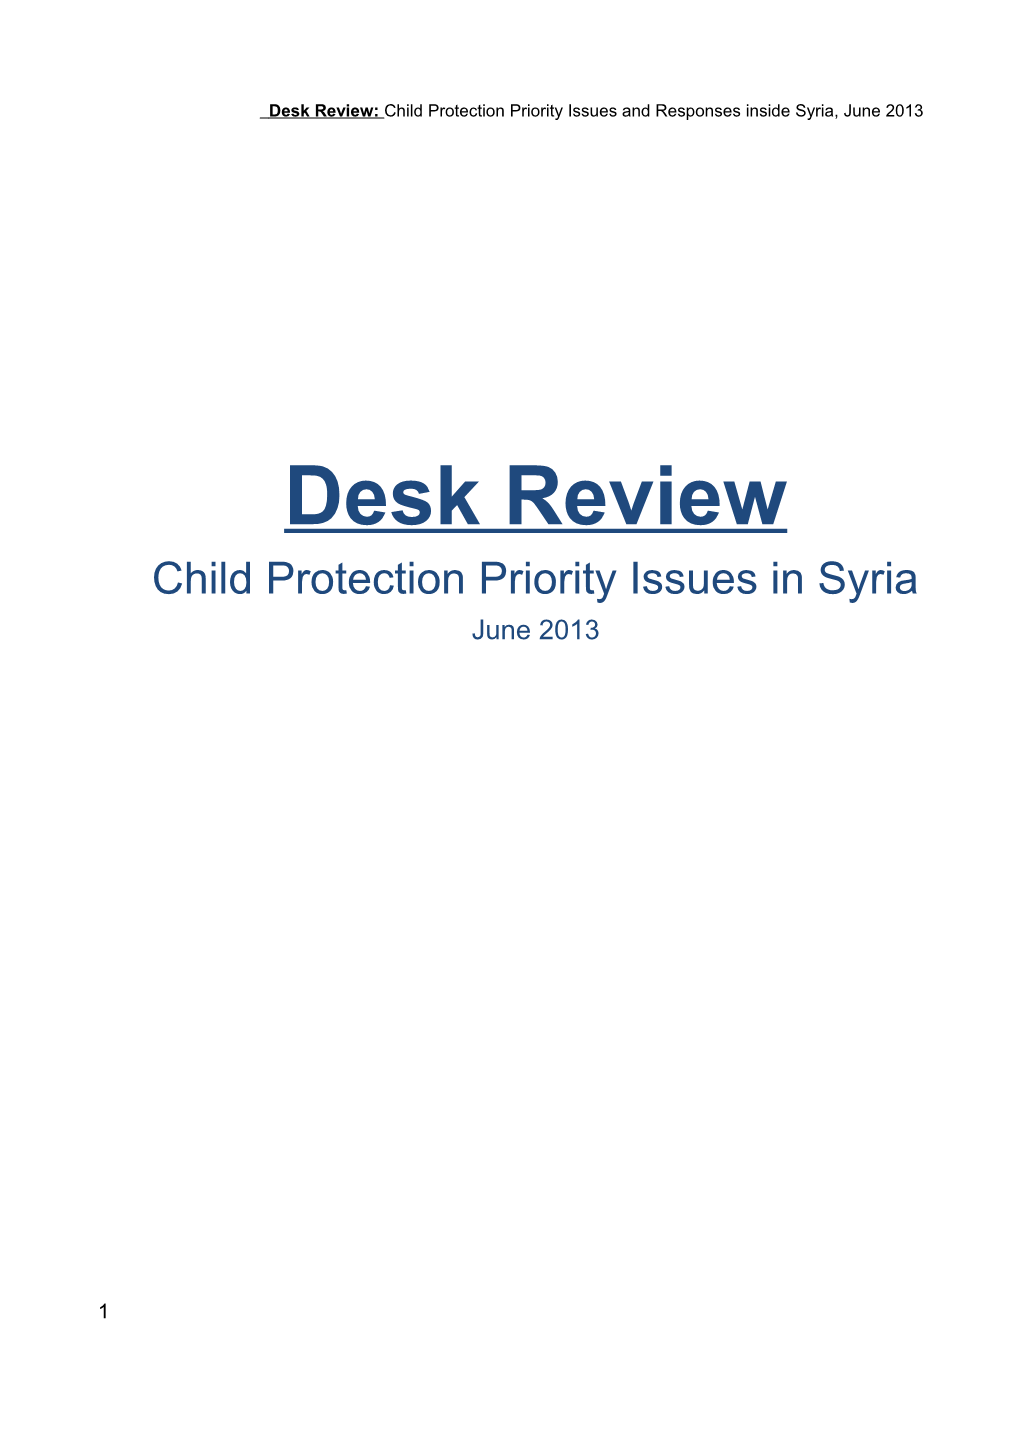 Child Protection Priority Issues in Syria